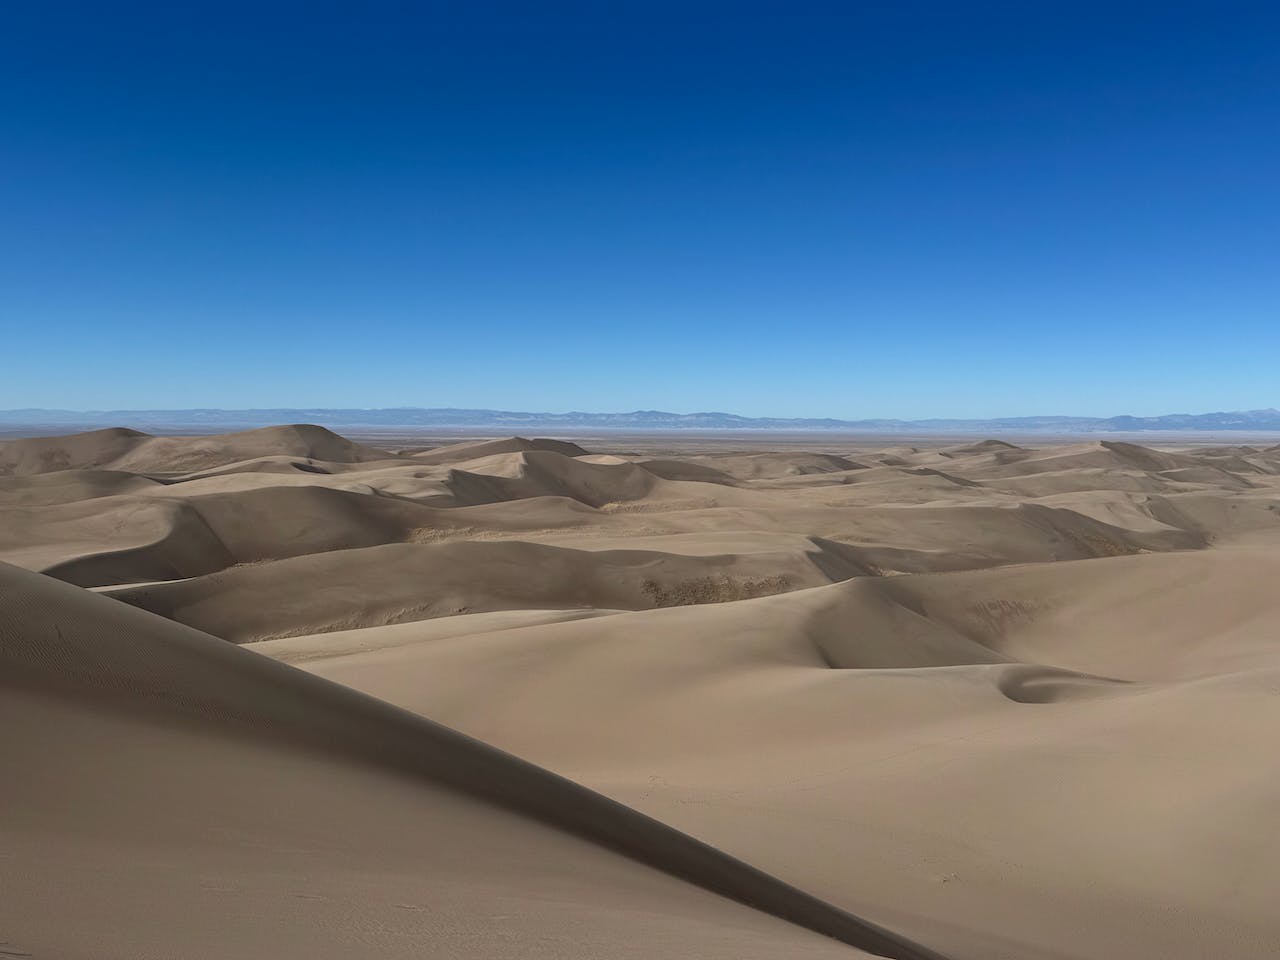 Far shot of the dune field at Great Dunes National Park, golden dunes on a vibrant, clear, blue sky backdrop